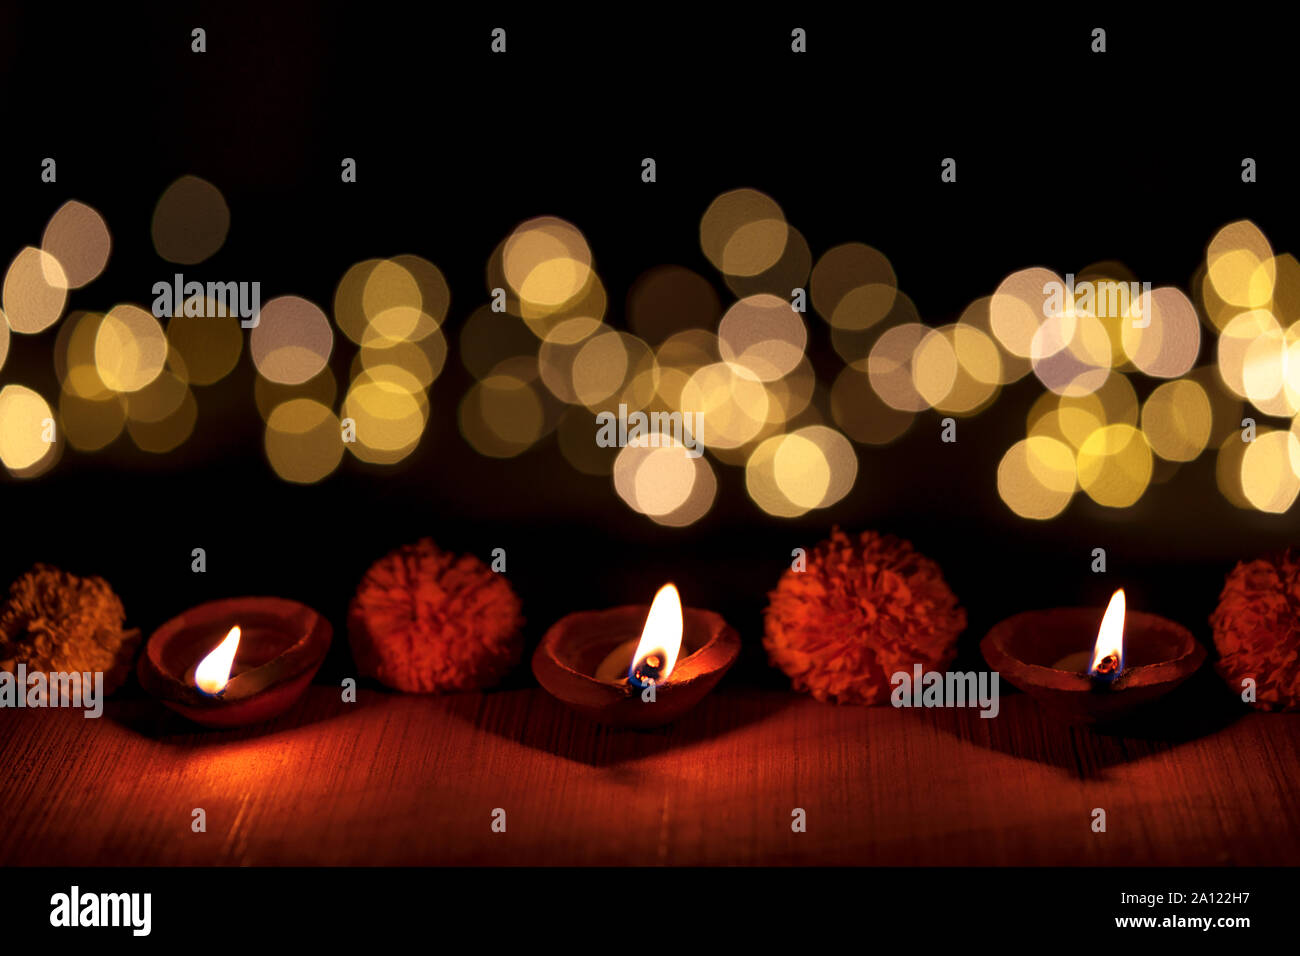 Dark moody diya or terracotta lamp lit in a row during Diwali Indian Hindu Festival with bokeh light isoltaed on black background. Stock Photo